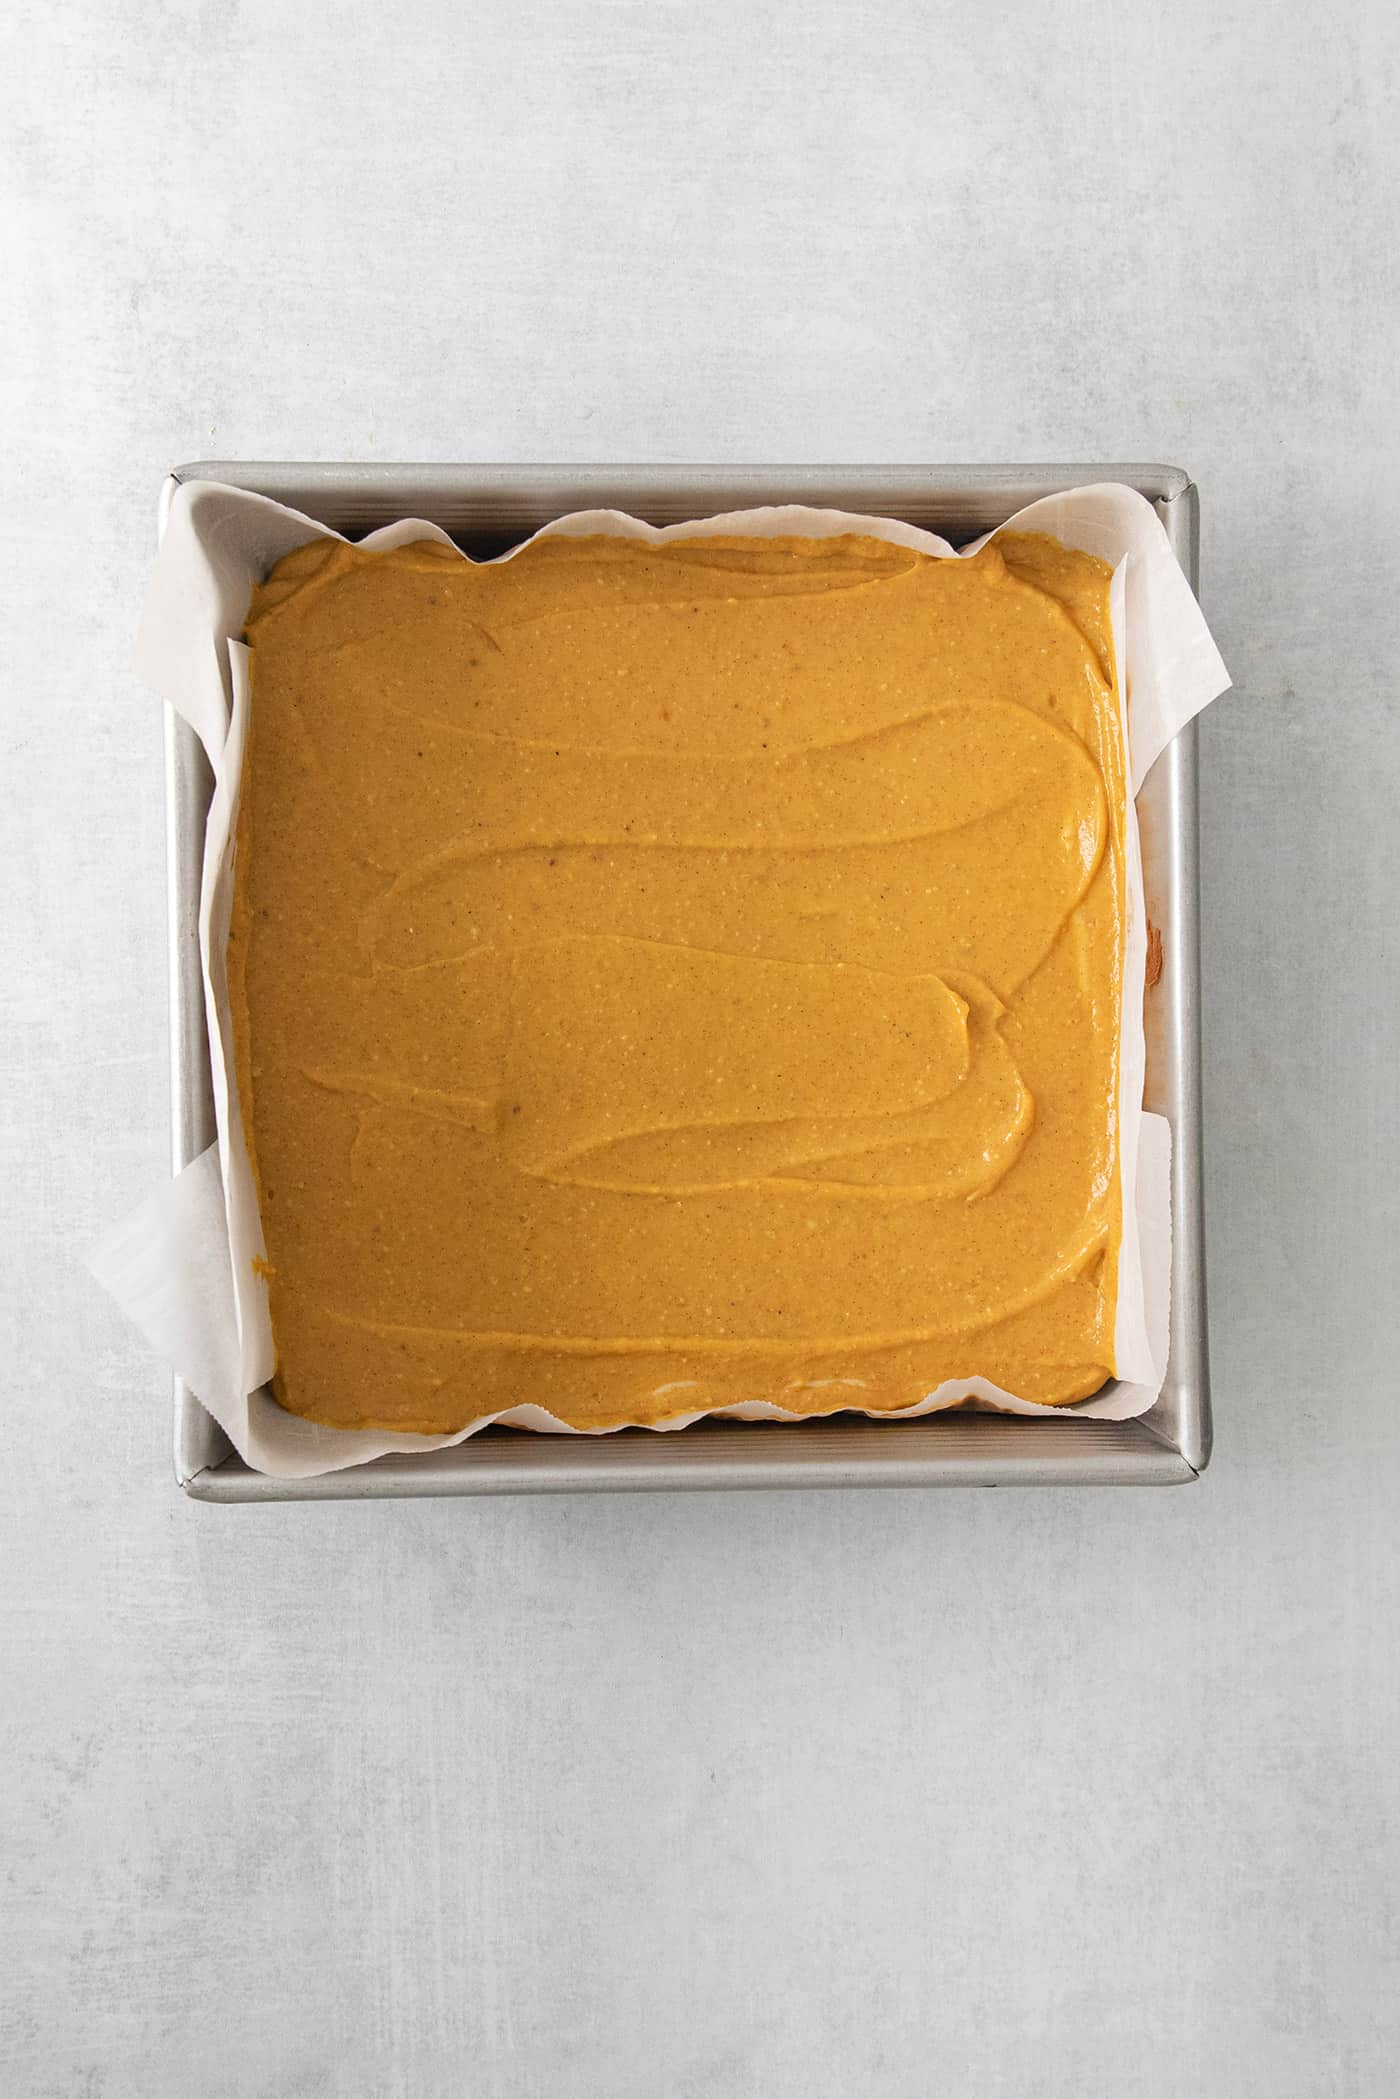 The pudding layer is spread on top of cheesecake in a square baking pan.